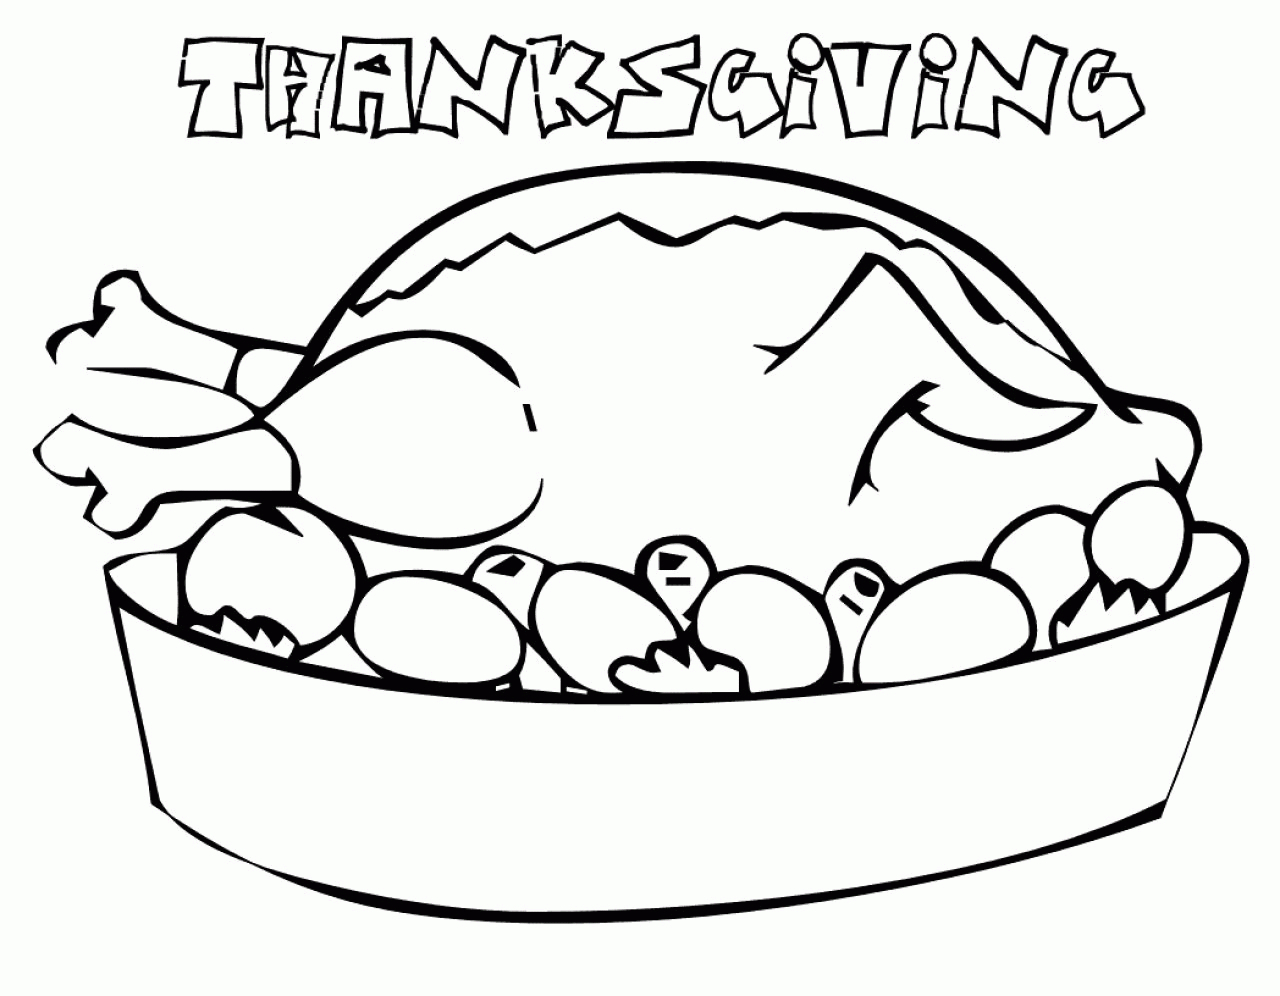 Free Printable Thanksgiving Coloring Pages For Kids - Dastin Decor | Free Printable Thanksgiving Coloring Pages Worksheets